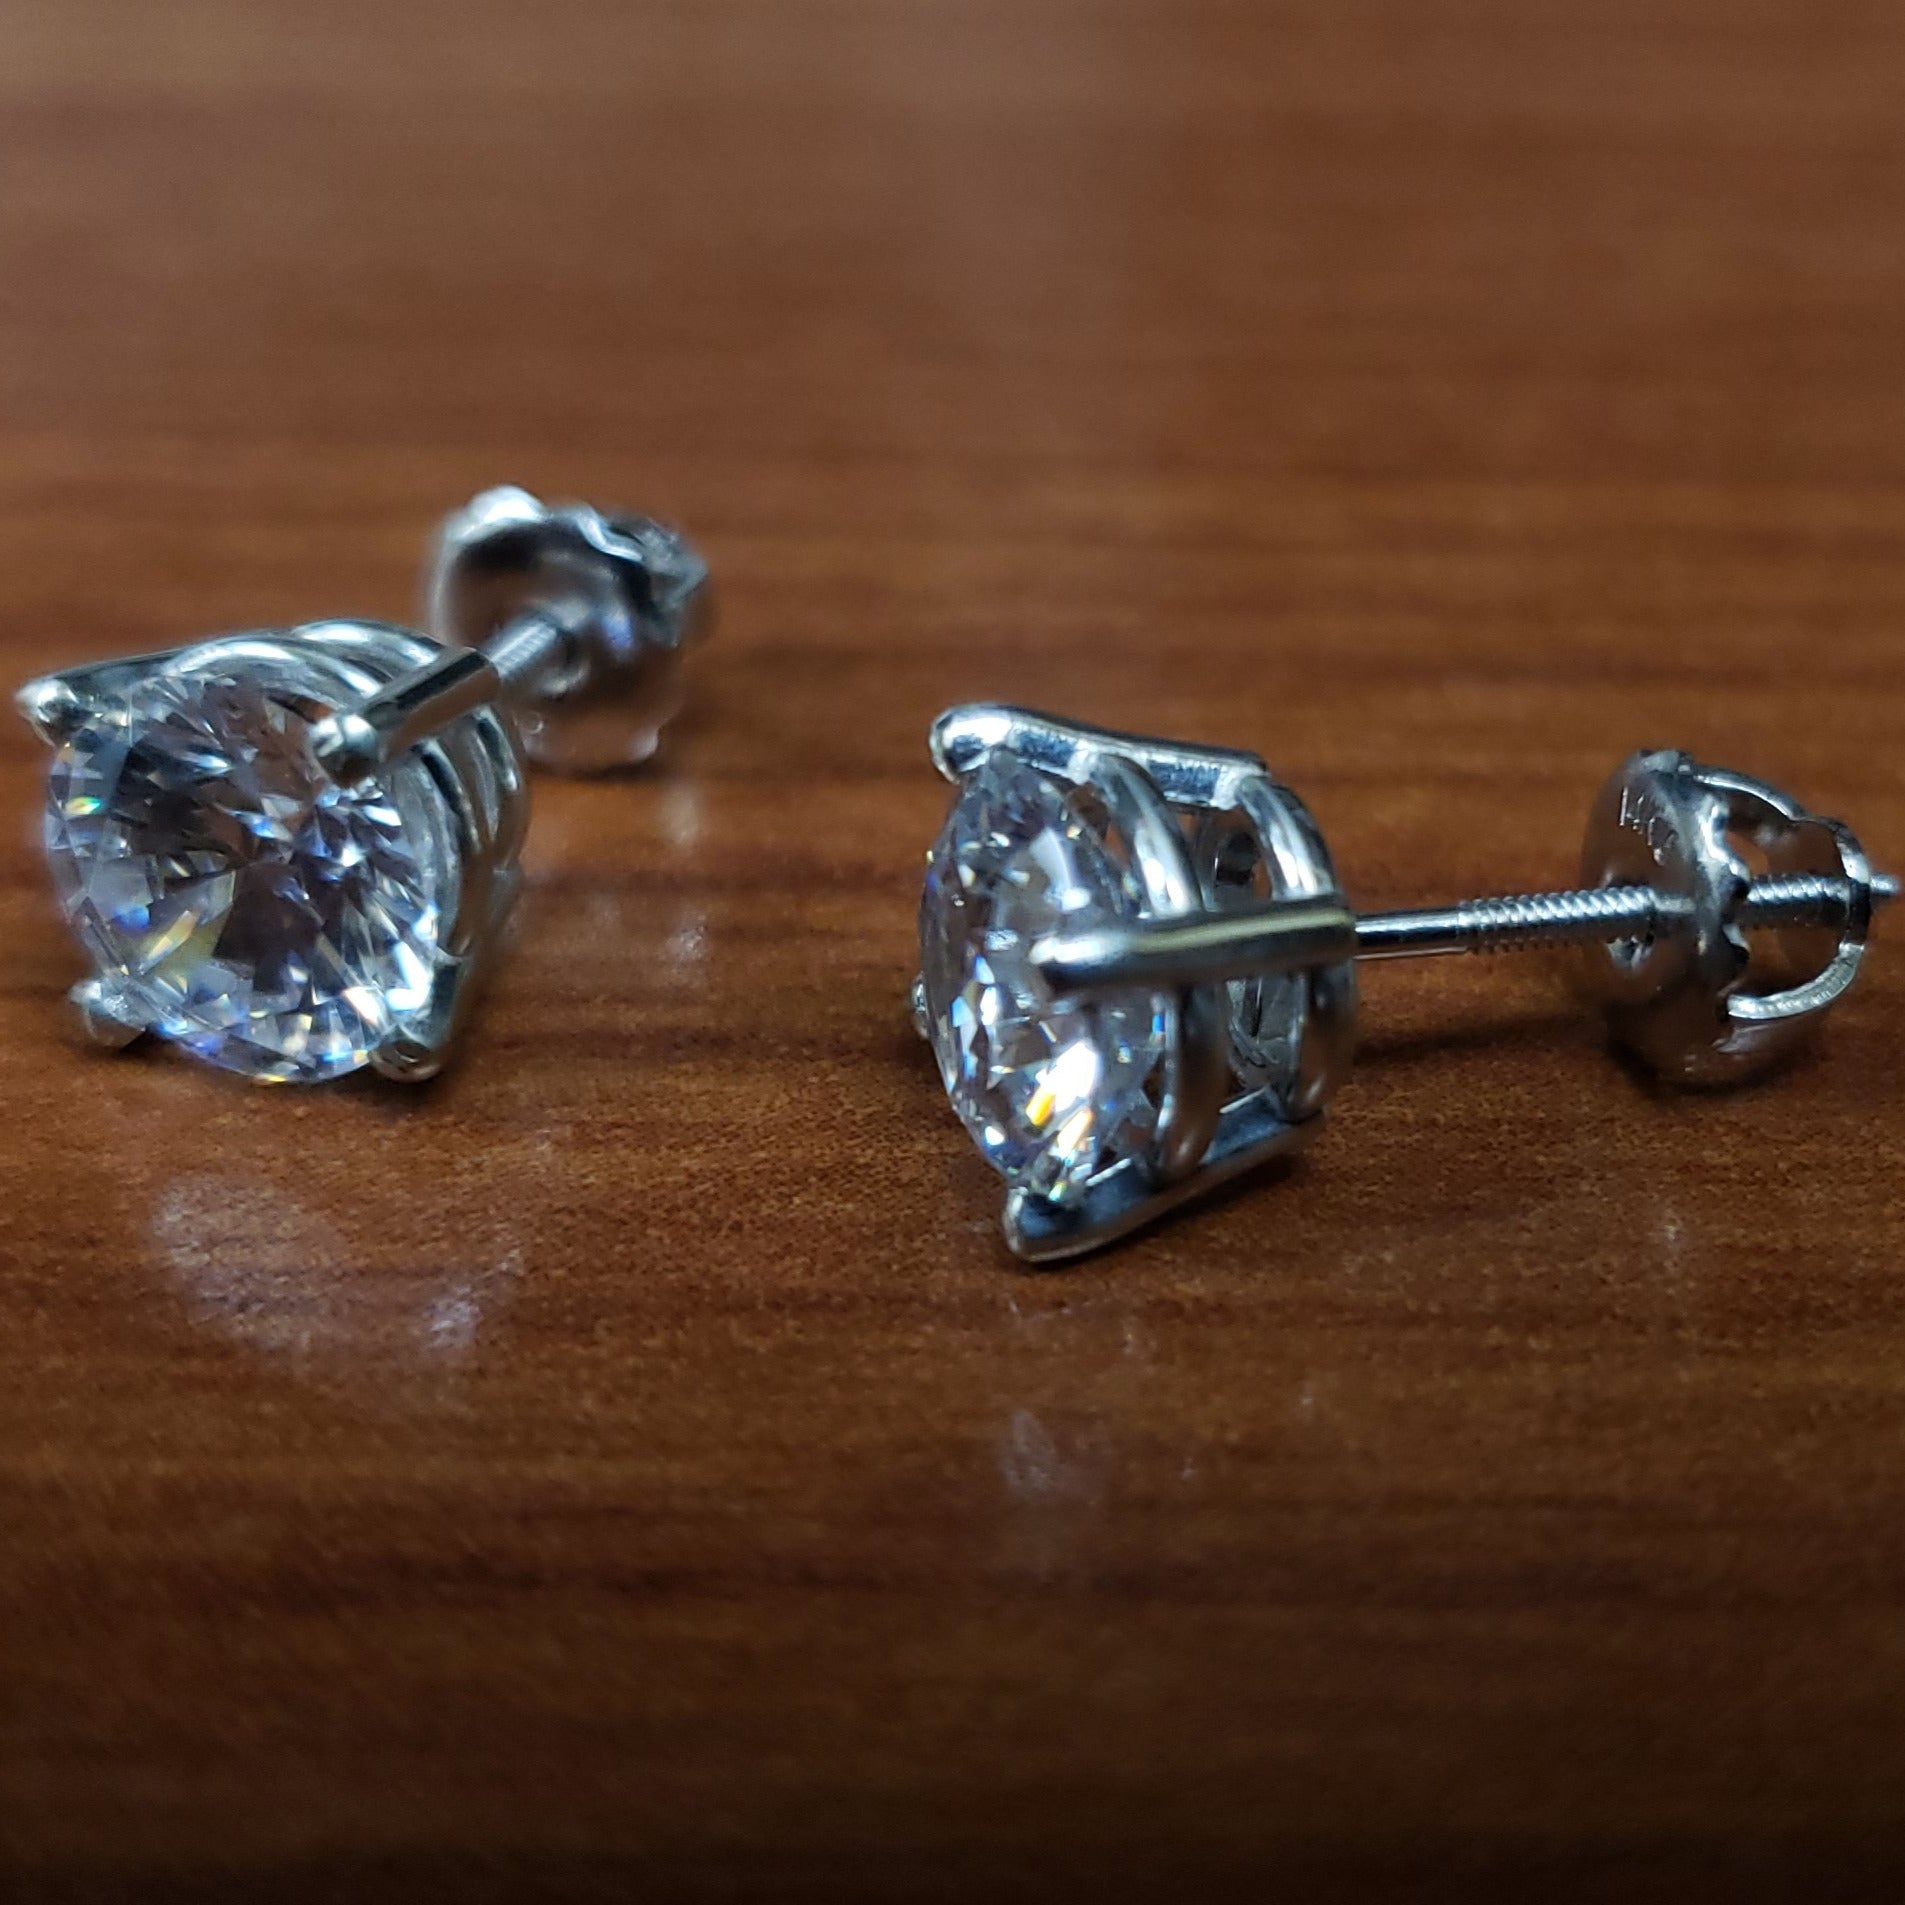 Cubic Zirconia Earrings-  (Ships Today) Customizable 4 Prong Round CZ Stud Earring Set With Screw Back